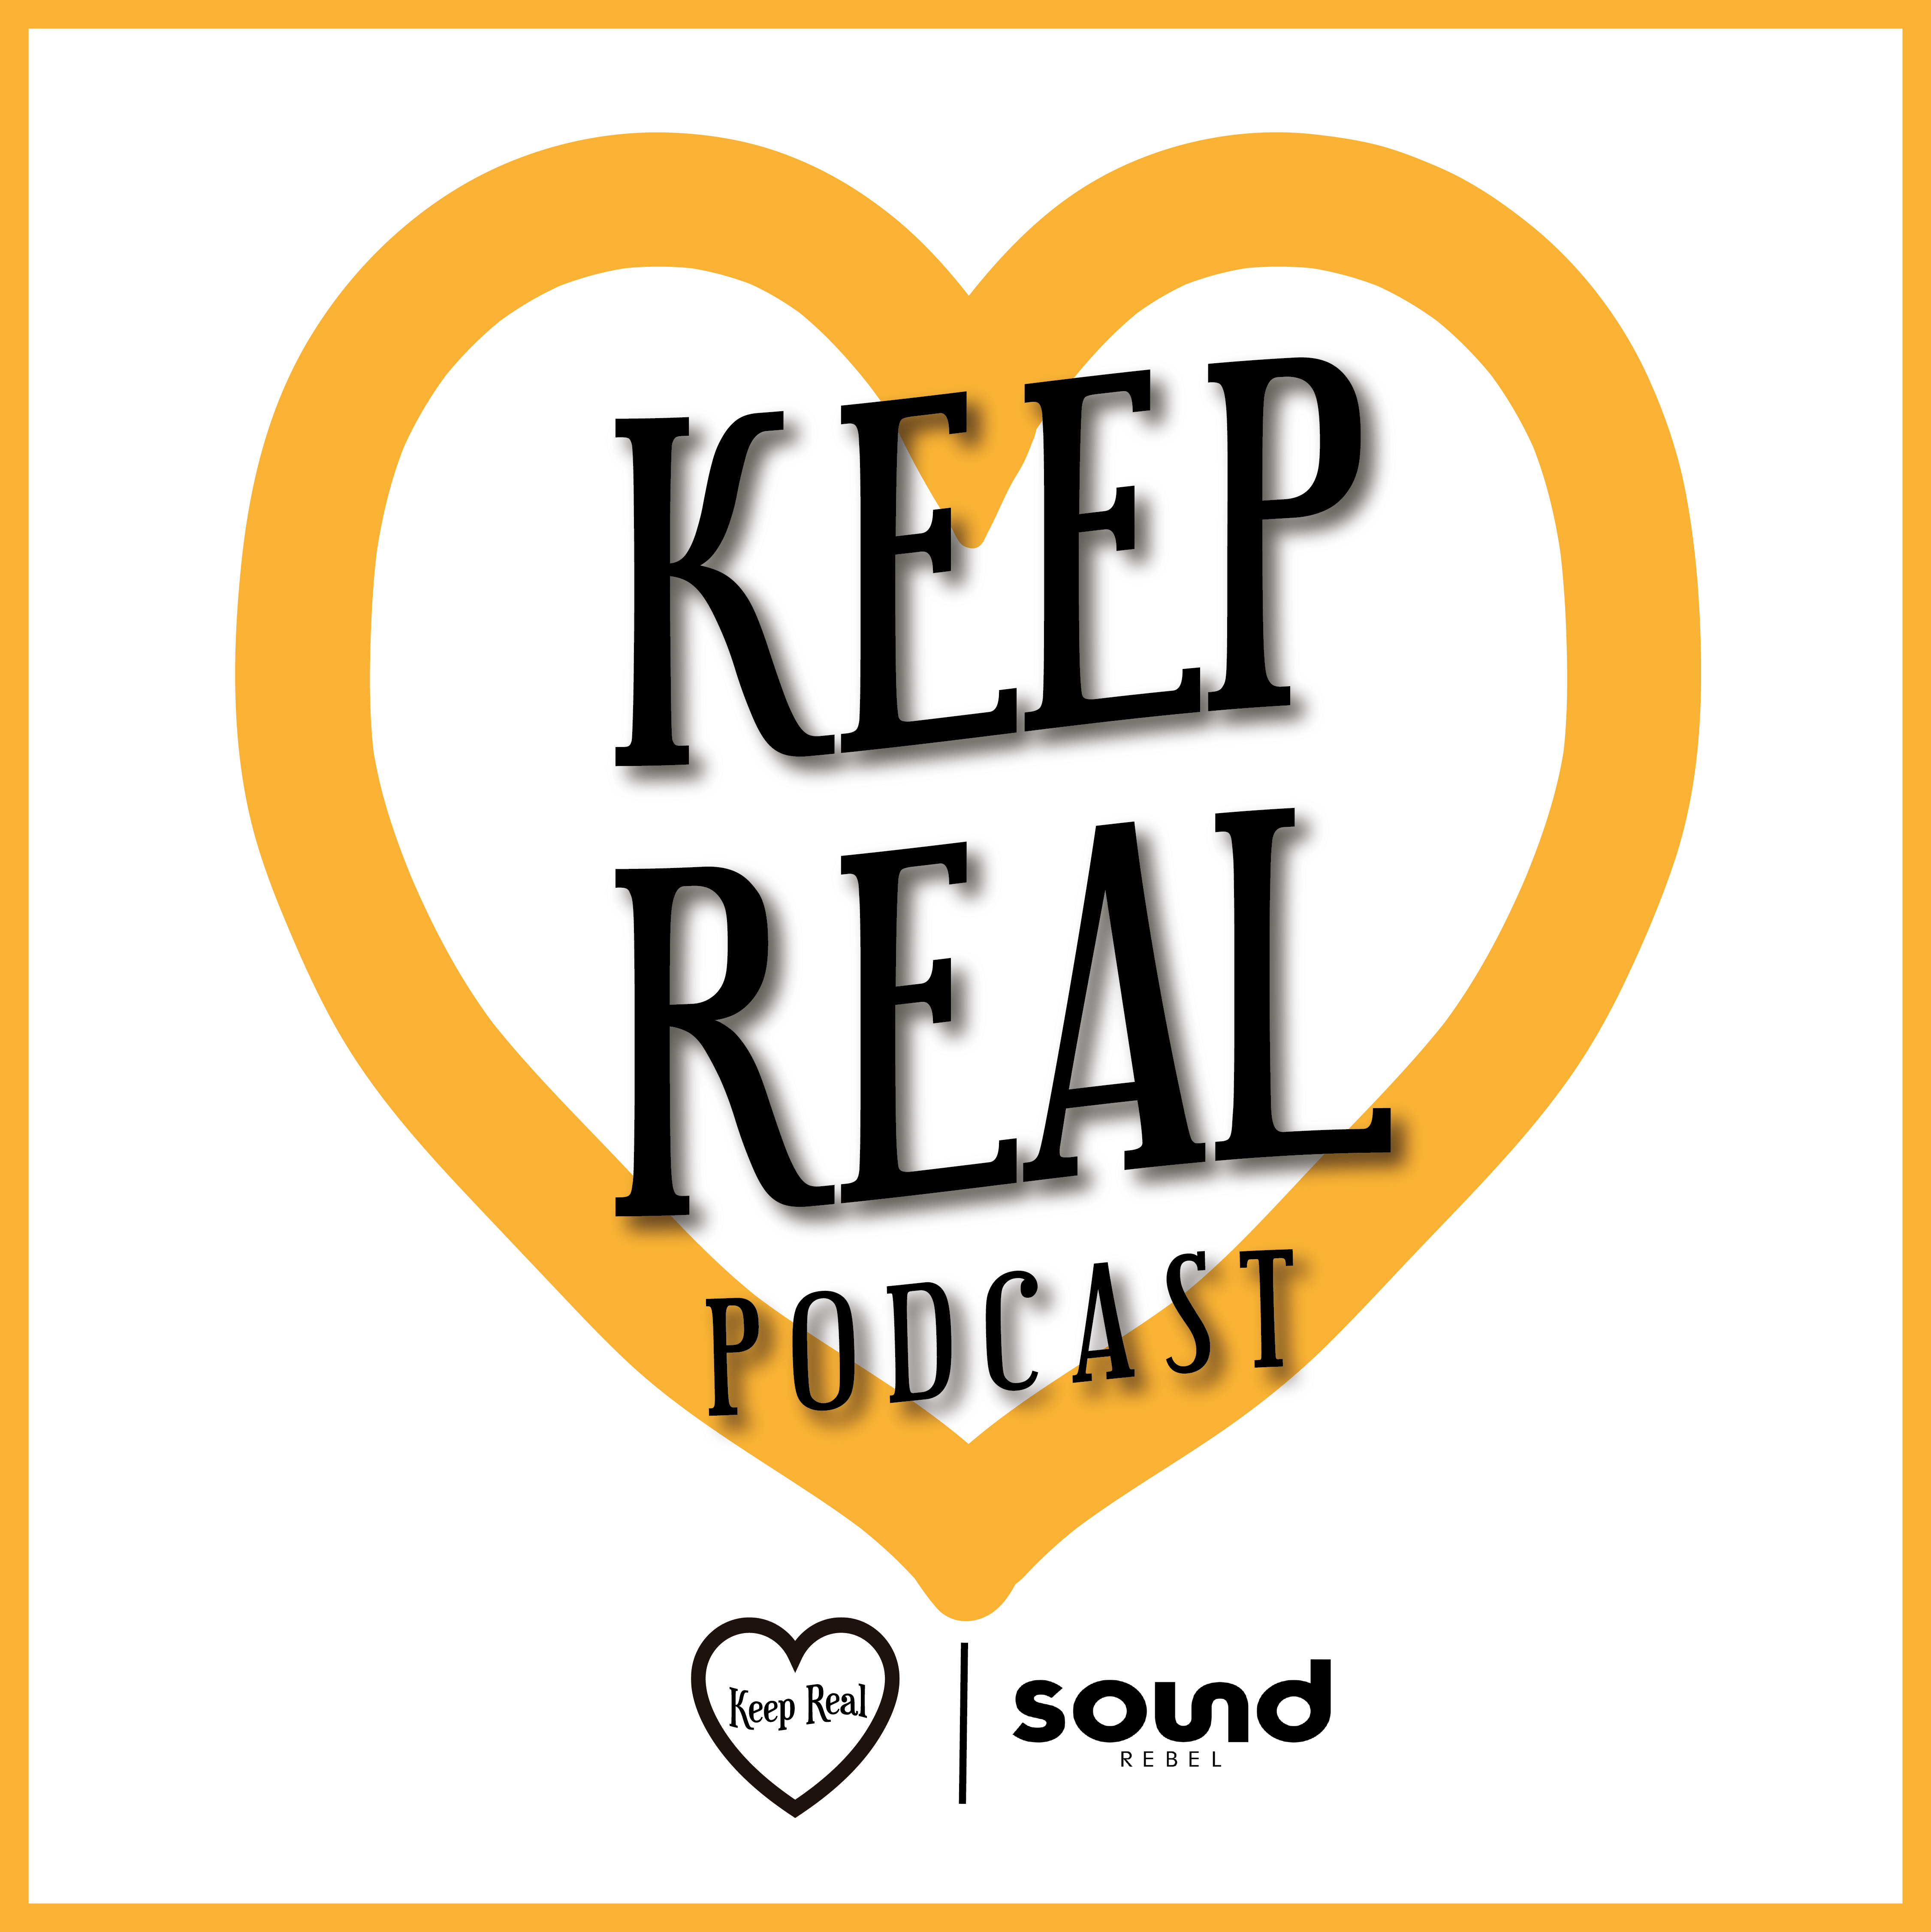 Image of the Keep Real podcast logo with heart